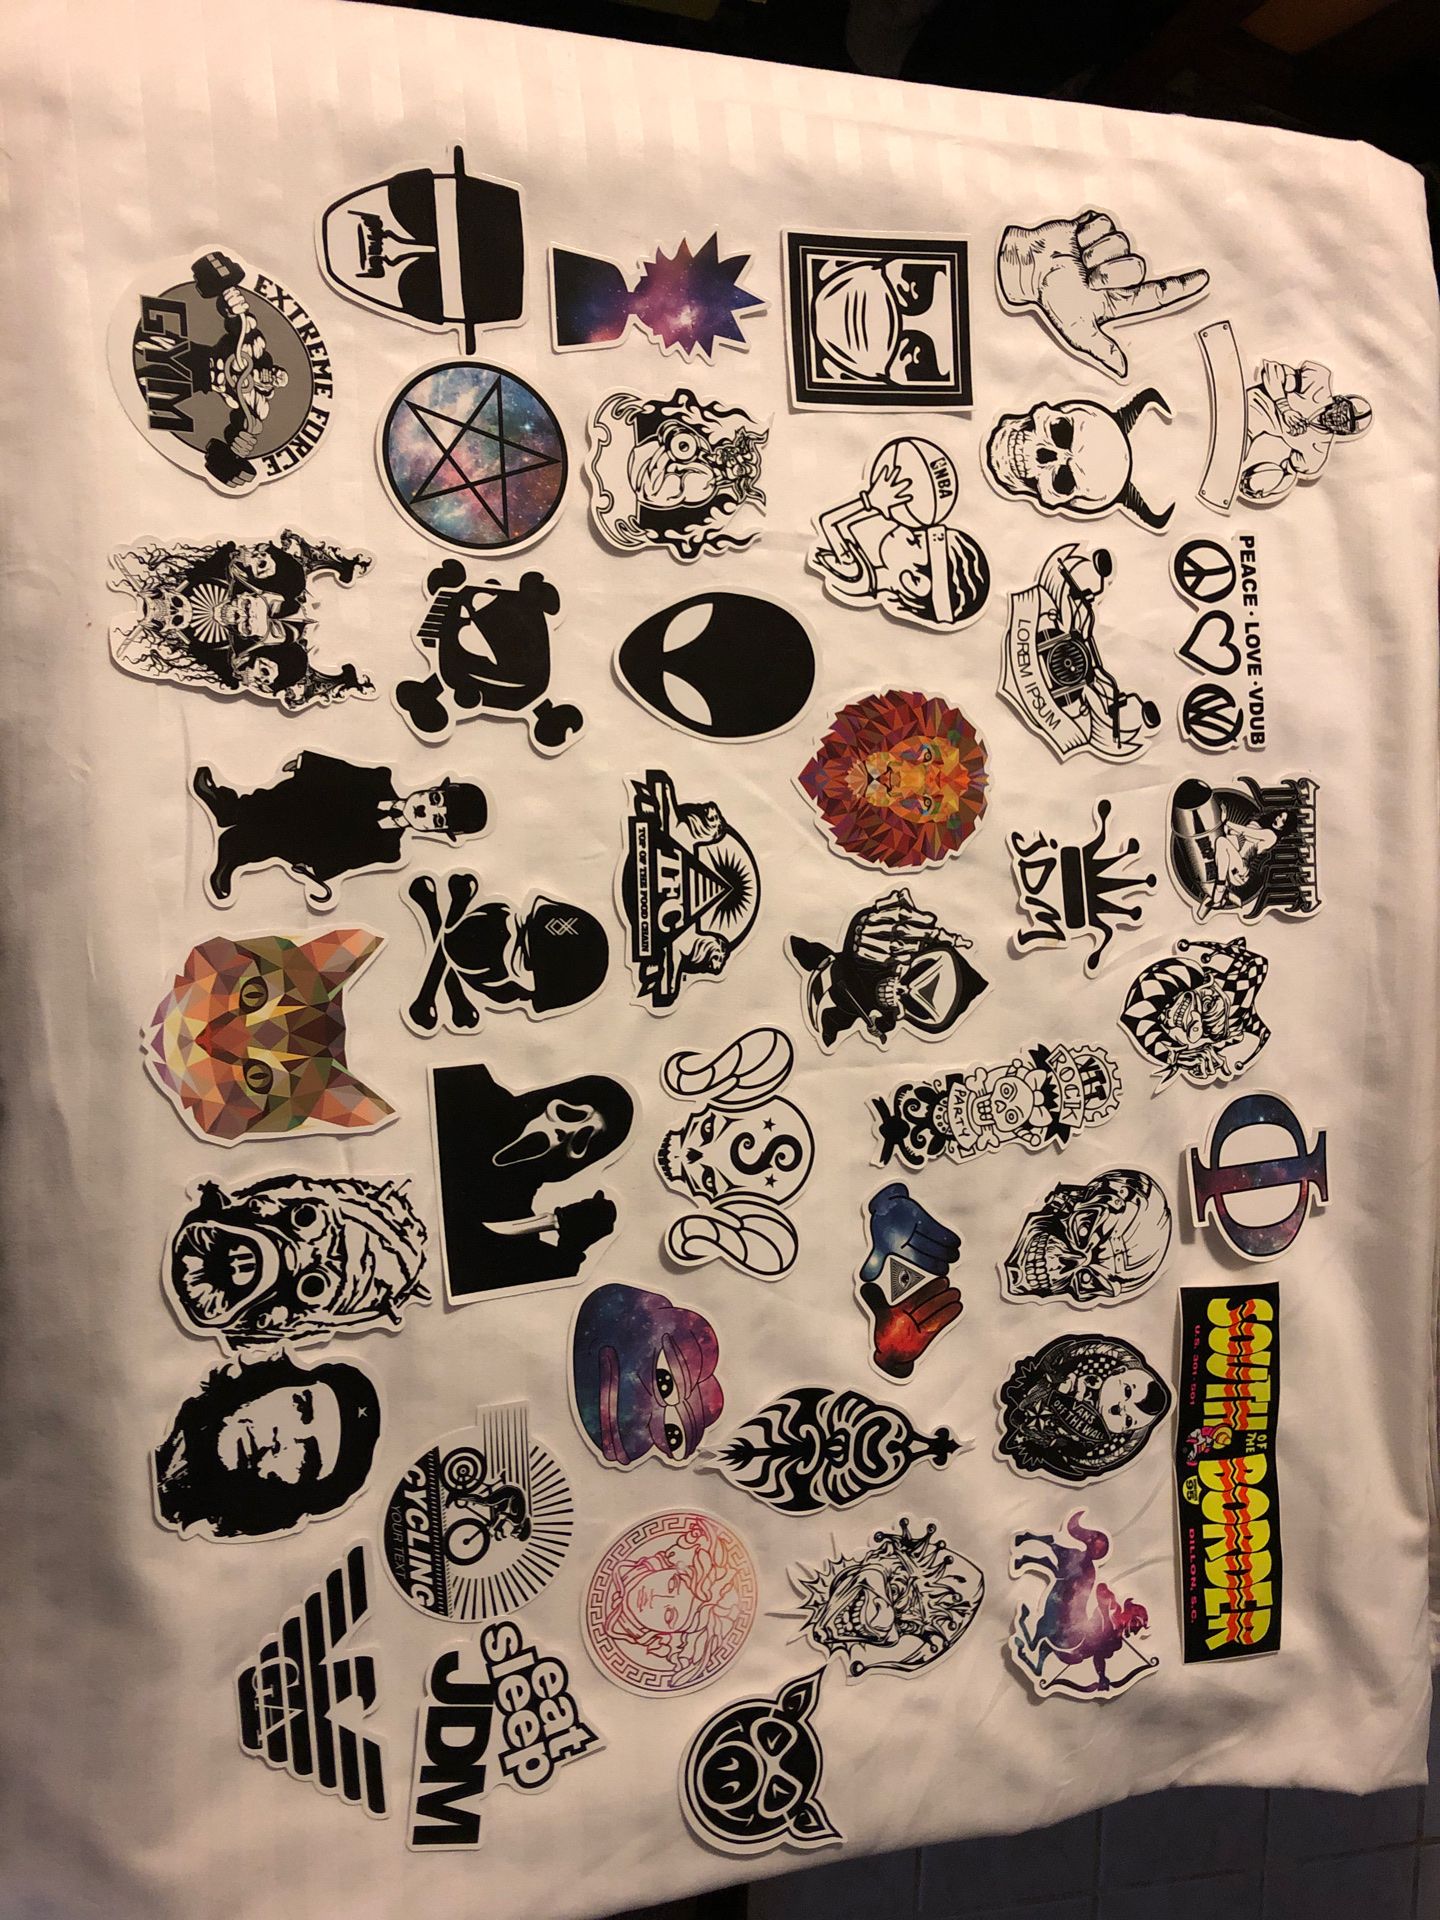 Decal collection (Boarding) 44 different